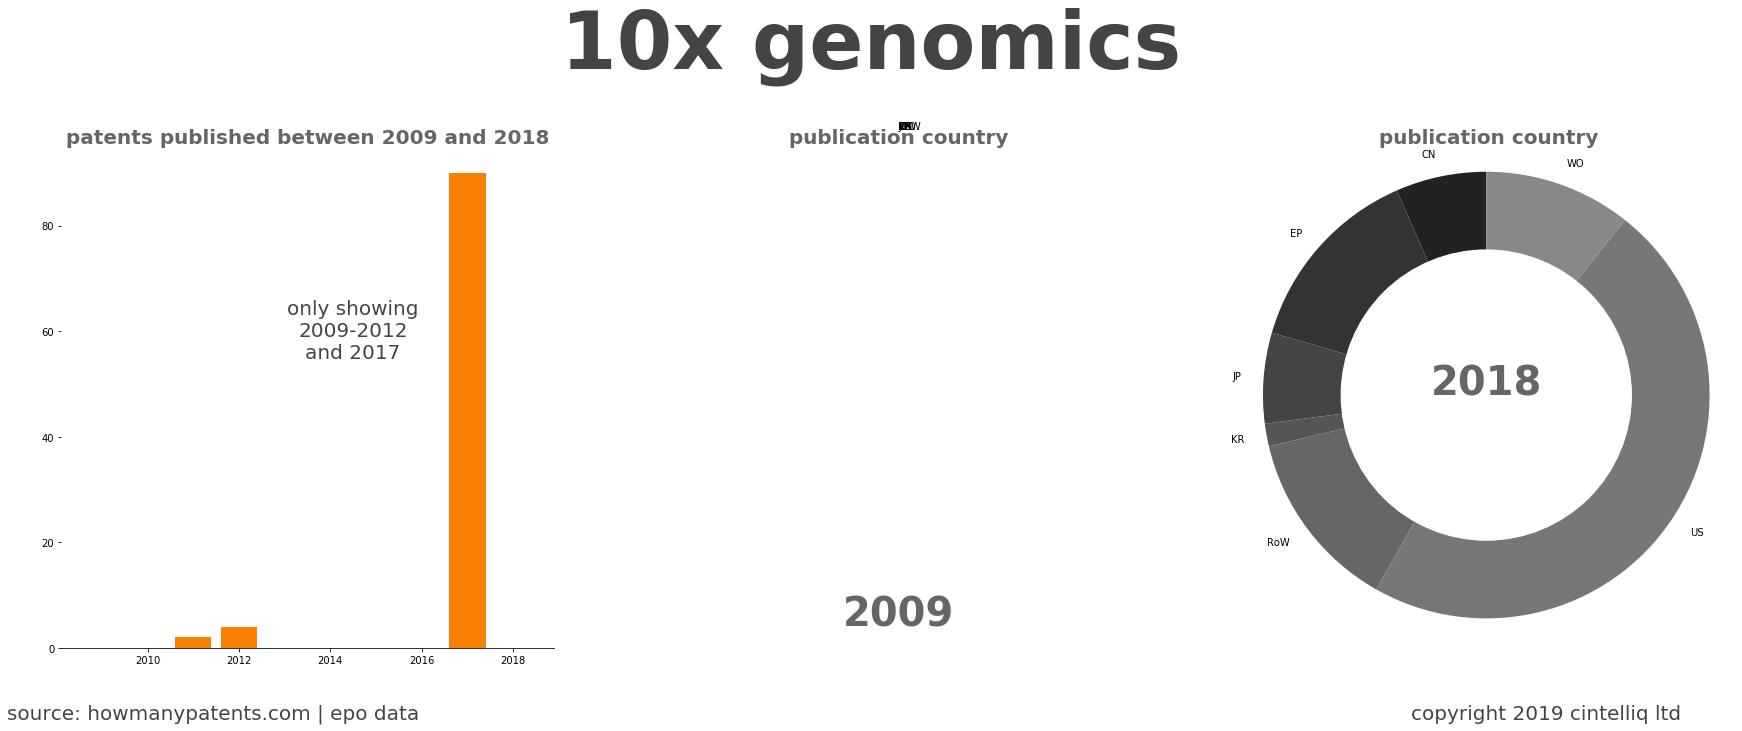 summary of patents for 10X Genomics